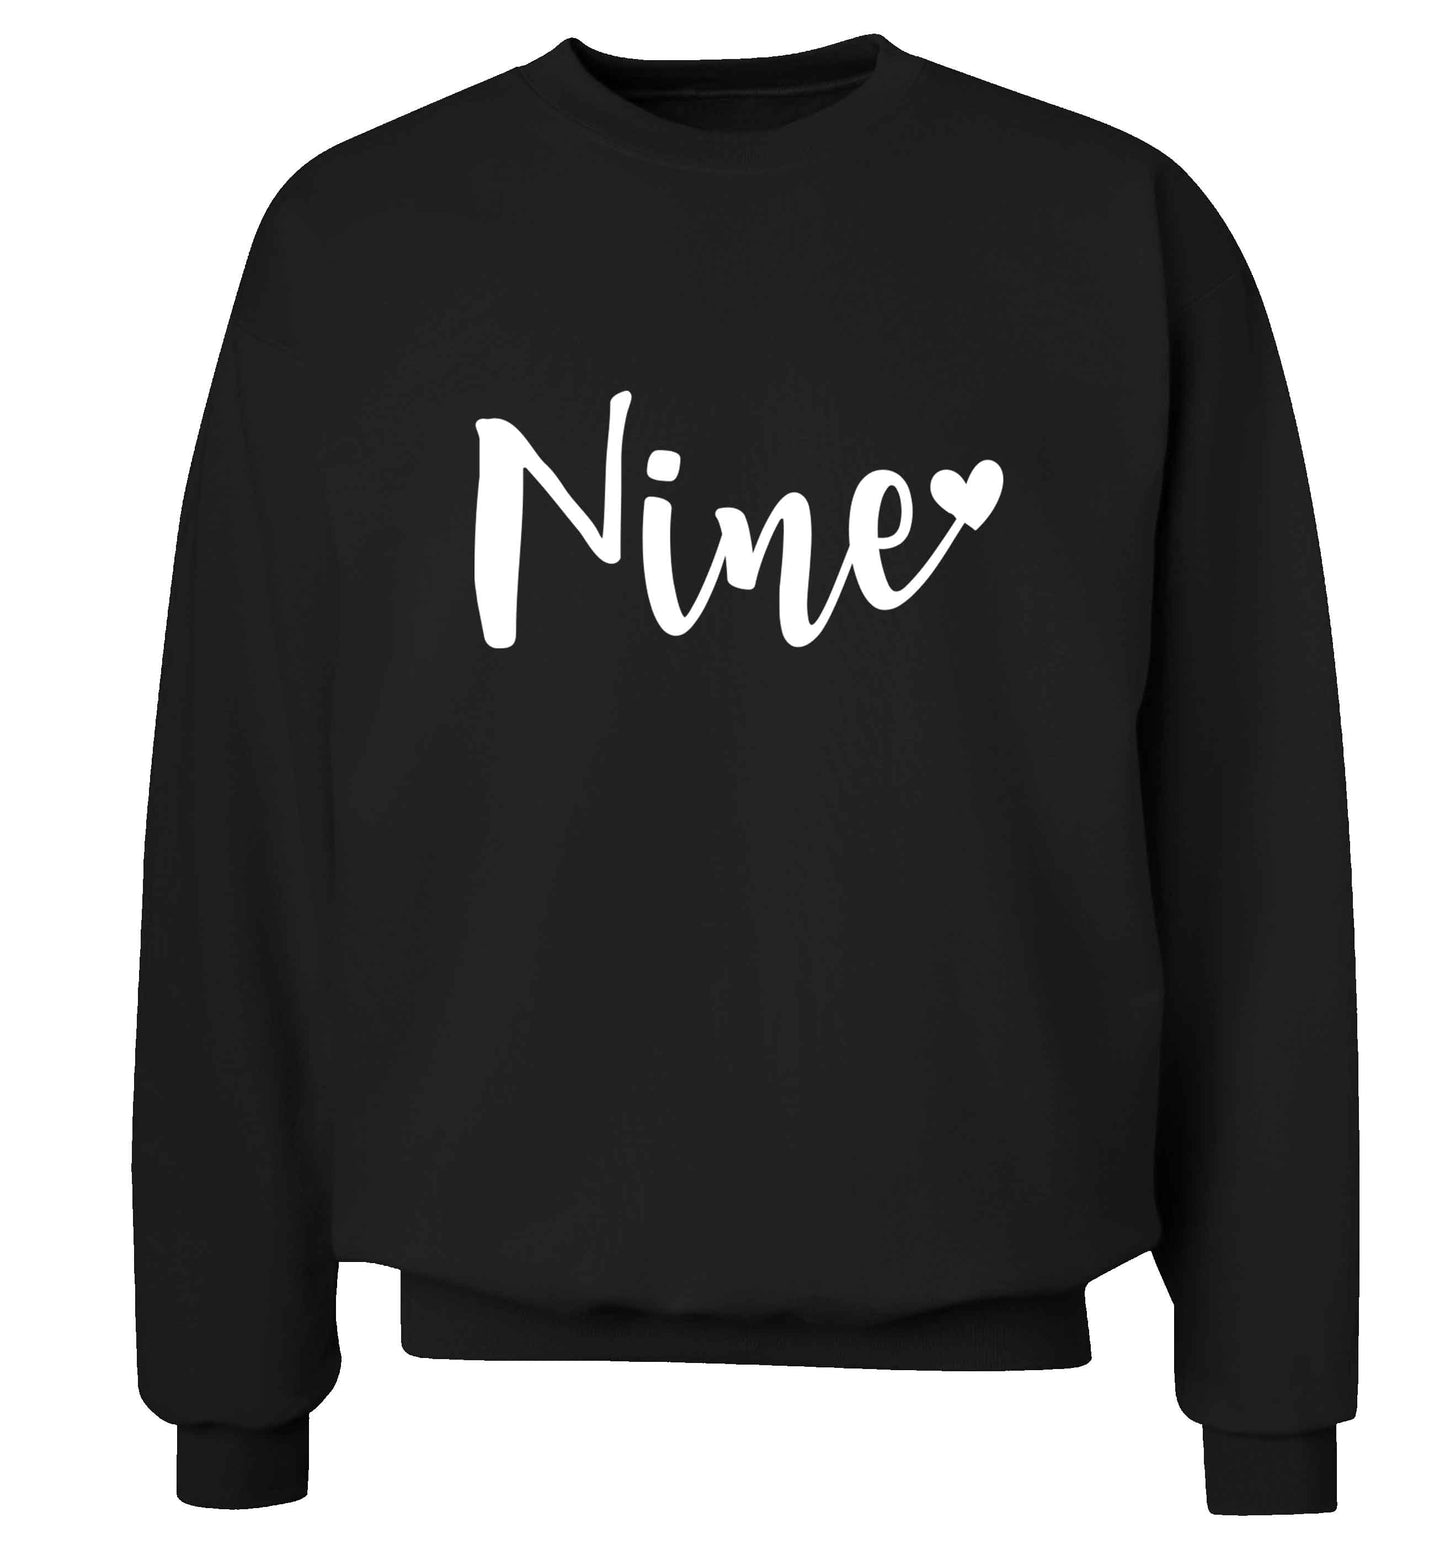 Nine and heart adult's unisex black sweater 2XL